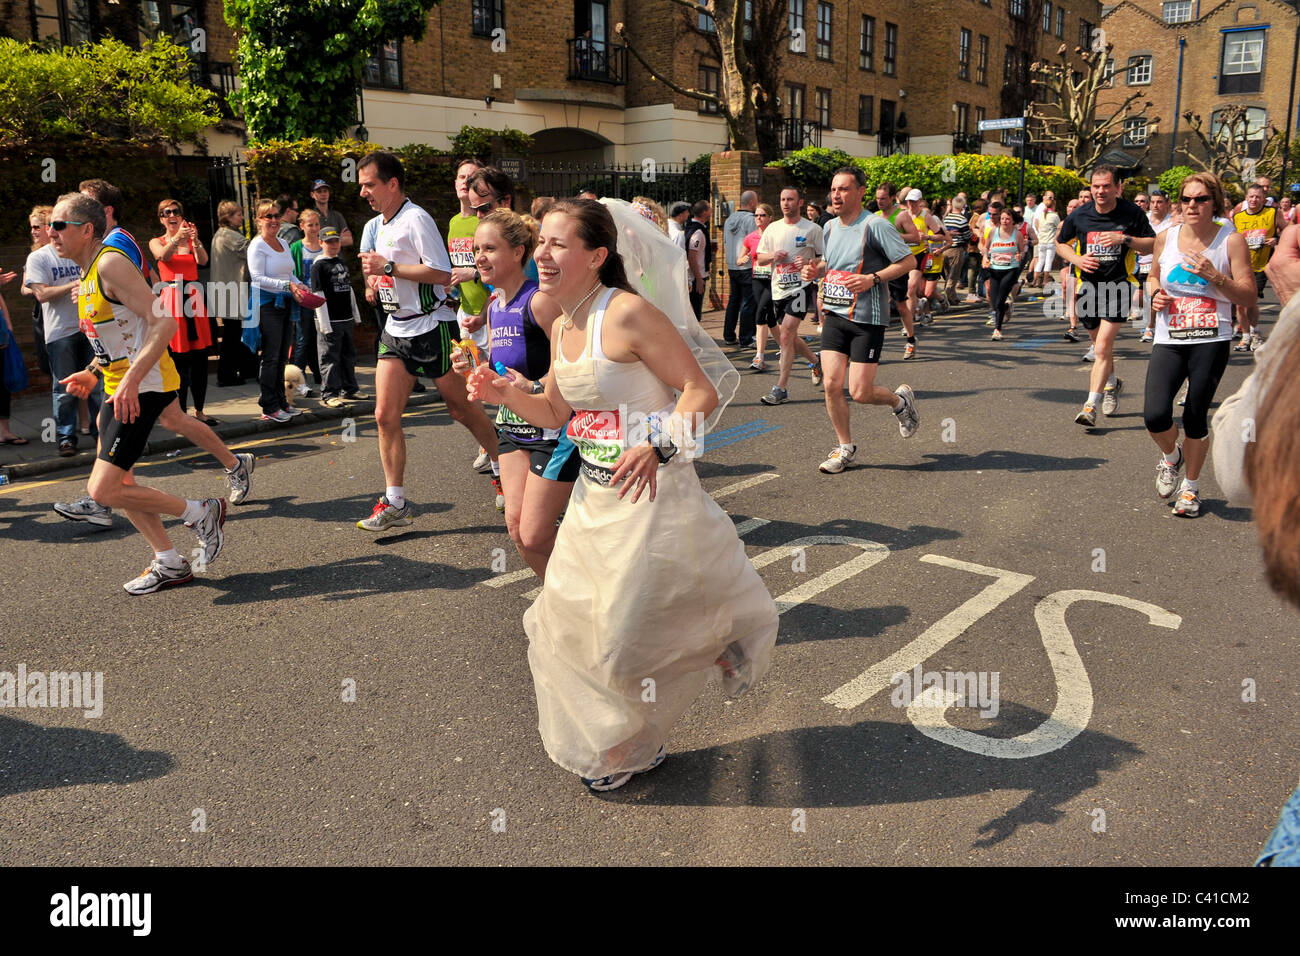 Runners take part in the Virgin 2011 London Marathon seen here at 14 Miles on a very hot day with one lady in a wedding dress Stock Photo